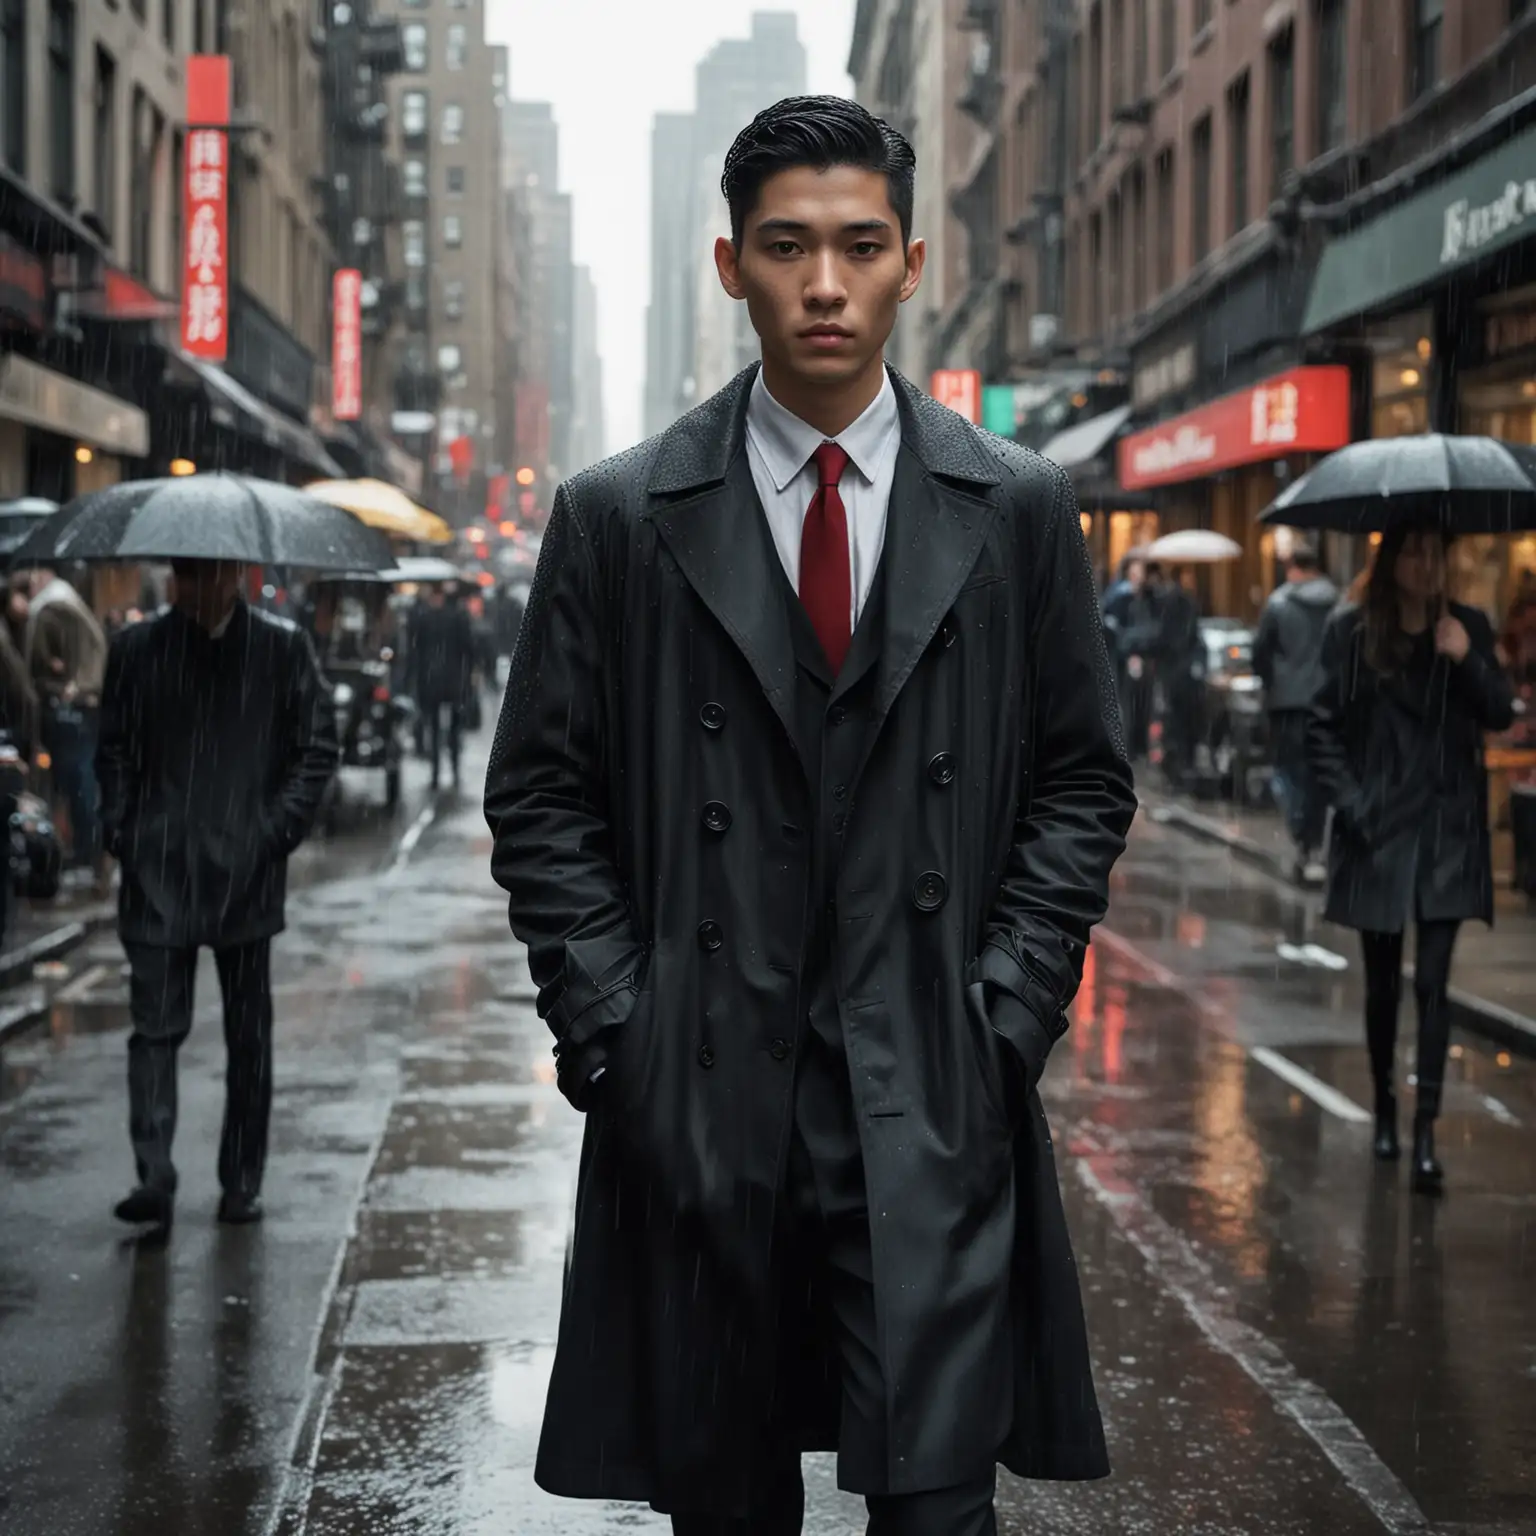 Sure, here's your AI-generated photo prompt:

Title: "Urban Elegance"

Description: A portrait photograph capturing the essence of urban sophistication, inspired by the iconic style of Annie Leibovitz. In the midst of a rainy day, a young Asian man with sleek black hair styled in a fade haircut stands confidently in the middle of a bustling city street. He exudes a sense of refined elegance dressed in a tailored black coat, crisp white shirt, and a bold red tie. The raindrops cascade down his coat, adding a dynamic element to the scene as he gazes directly at the camera with an enigmatic expression, embodying a modern interpretation of timeless style amidst the urban chaos.